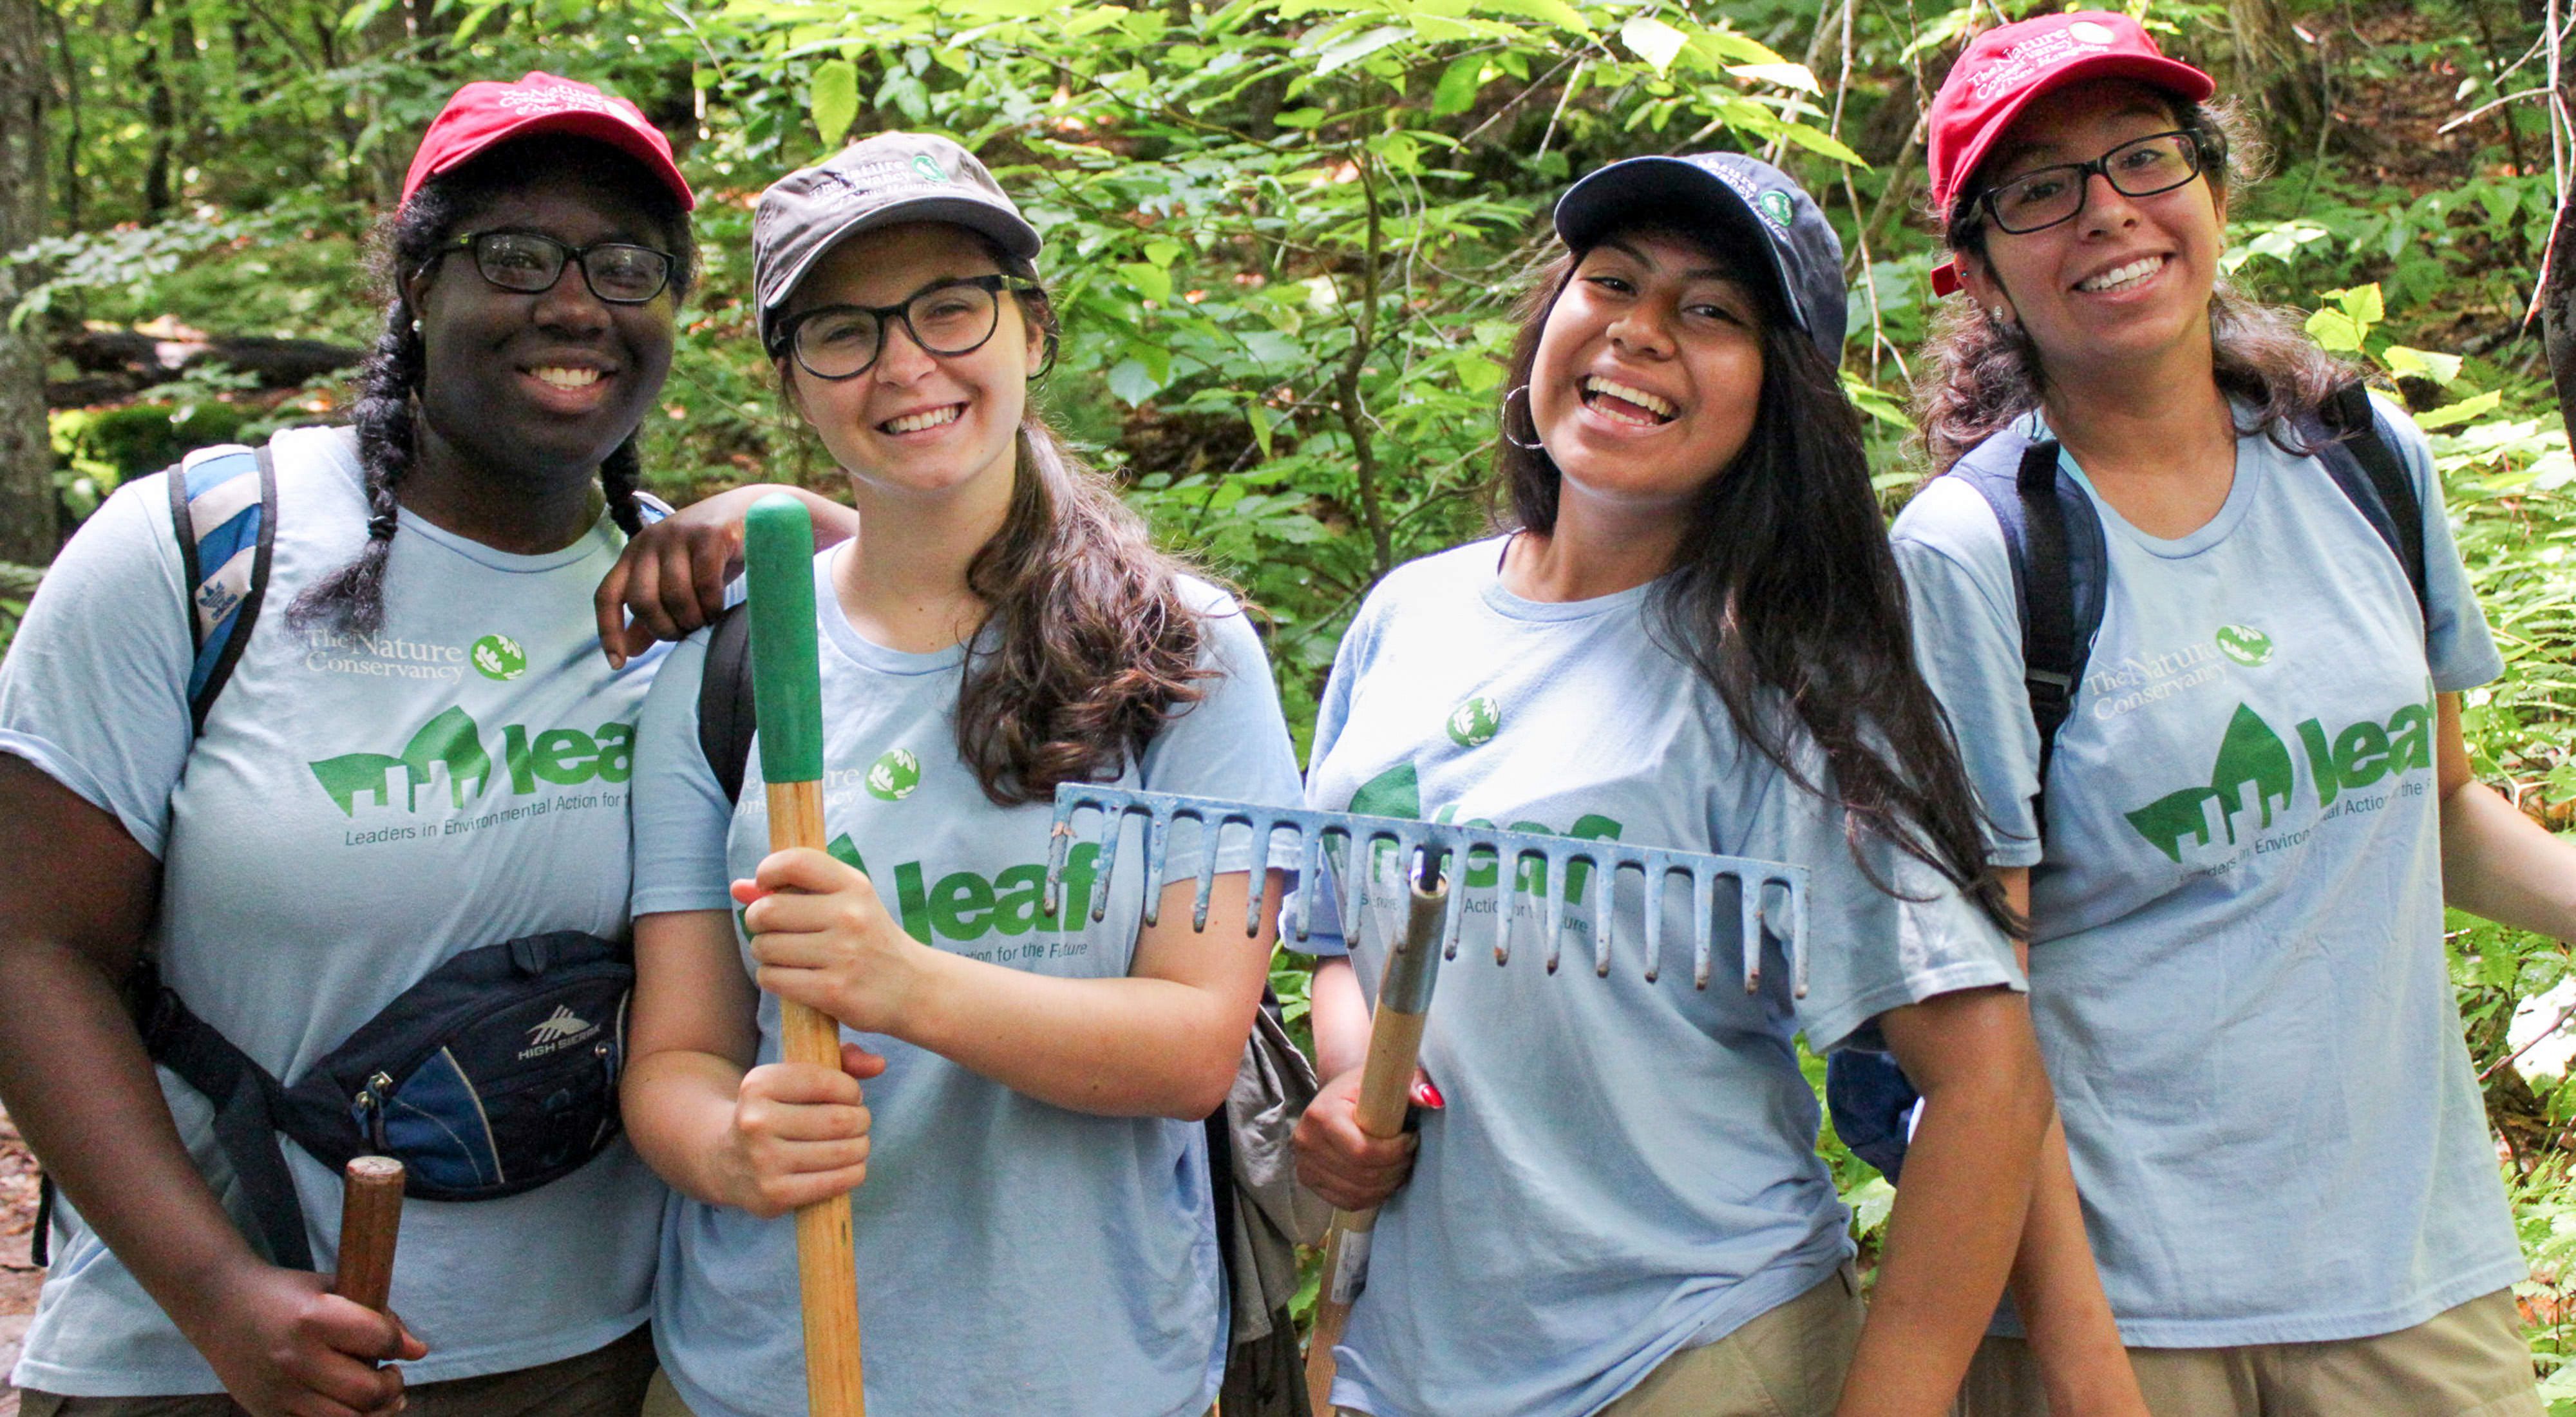 Four young women in blue t-shirts smile at the camera while holding rakes and shovels.